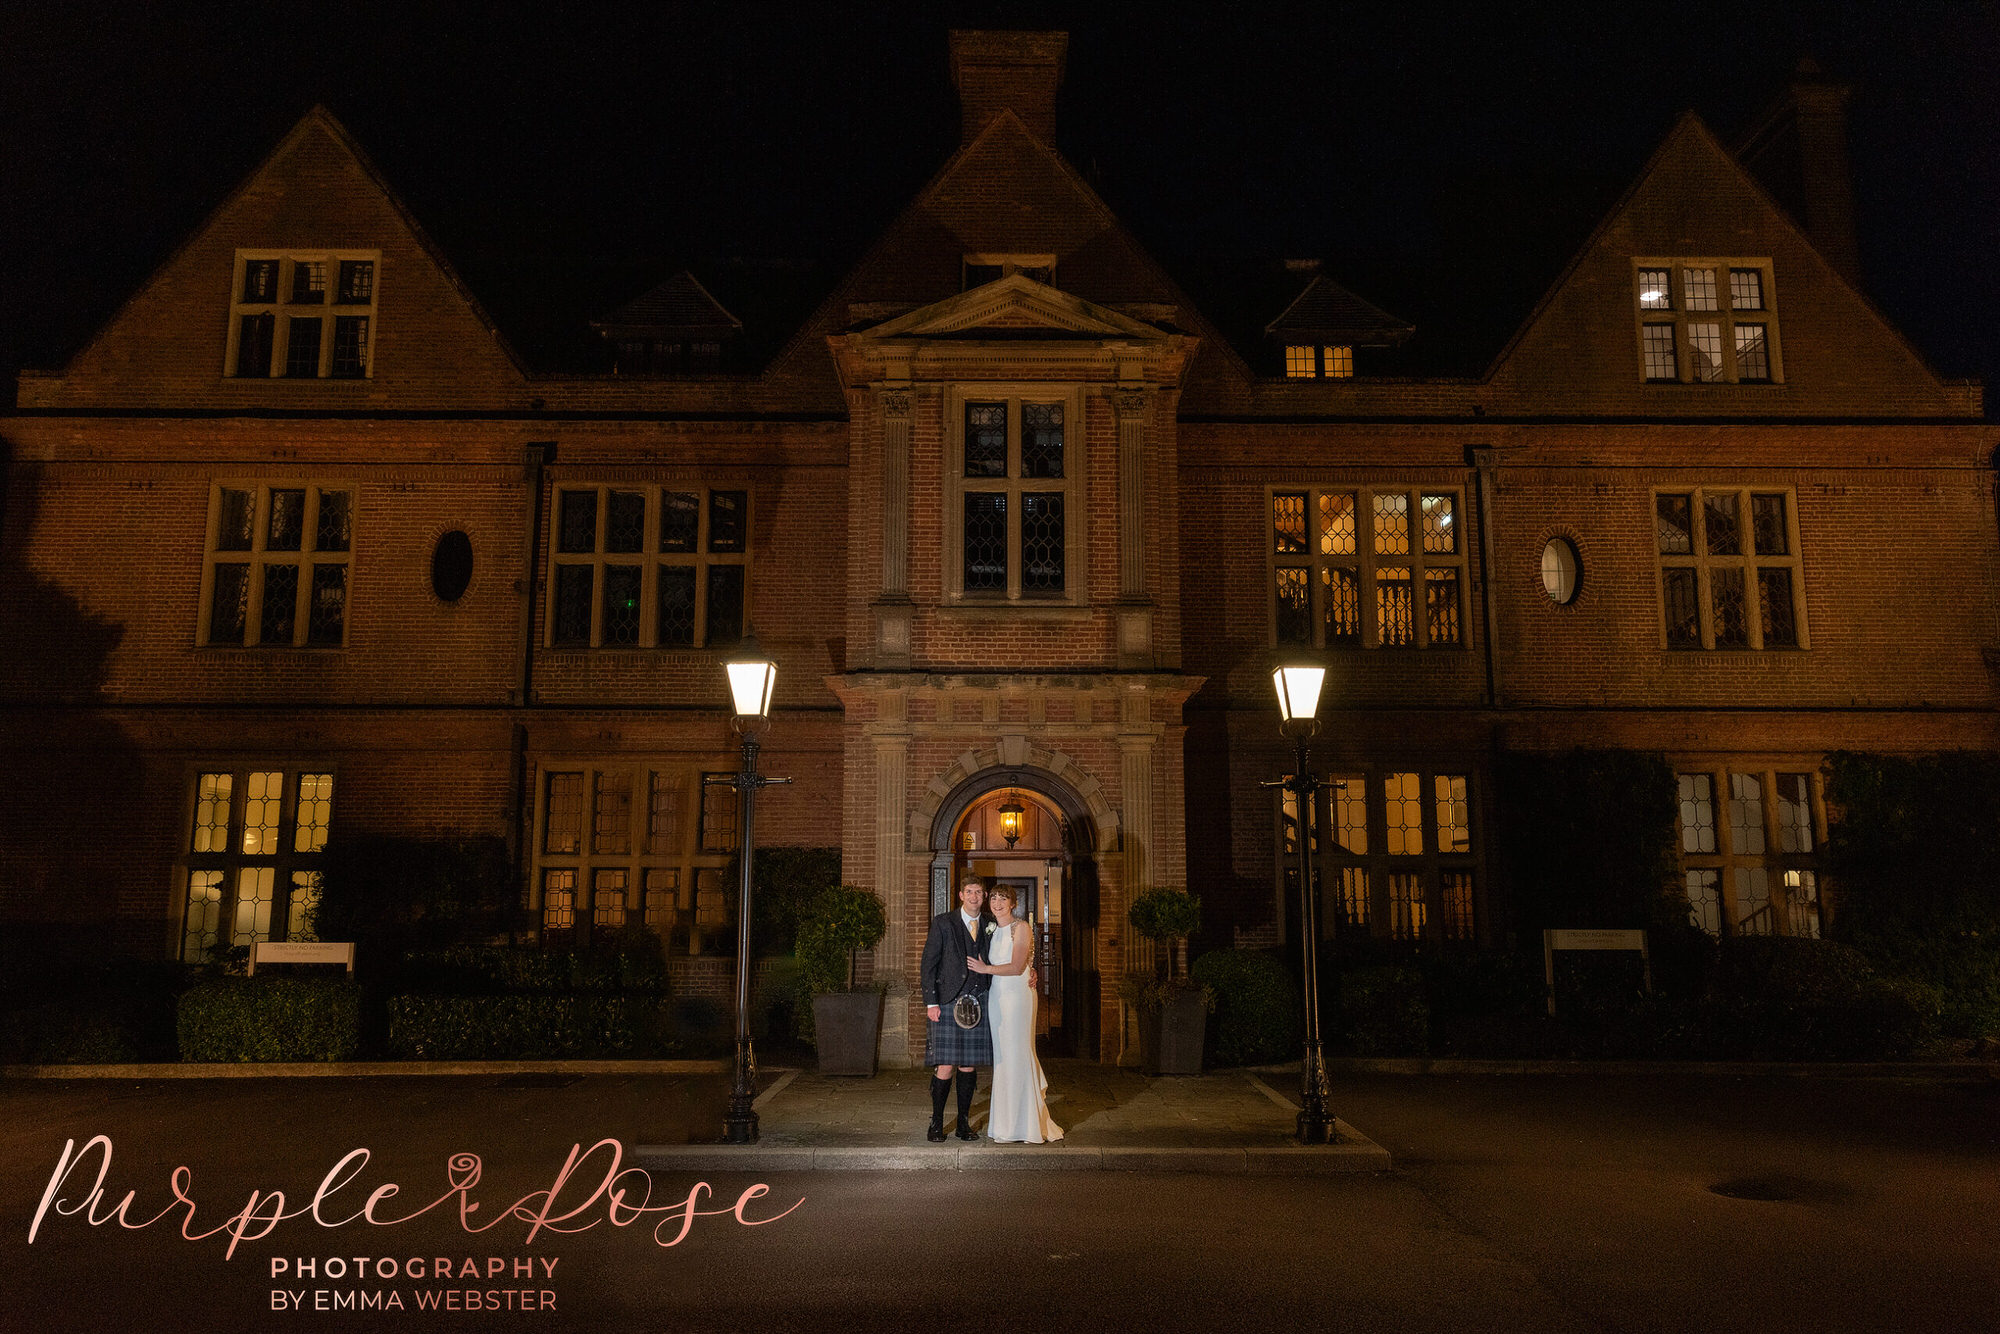 Bride and groom in front of Horwood House at night